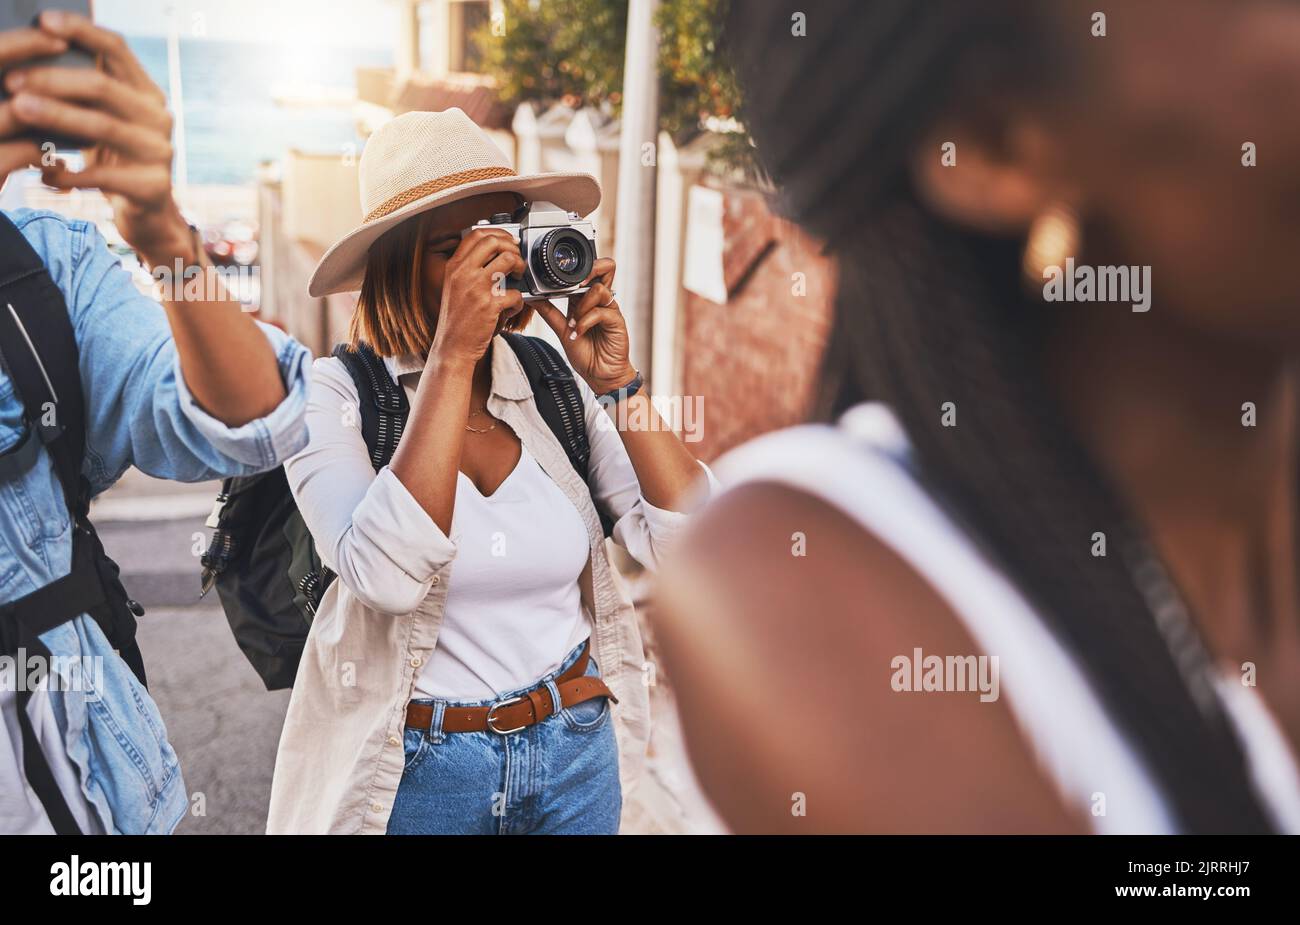 Travel, tourism and photograph with a woman tourist taking a picture while on holiday, vacation or weekend getaway. Memories, sightseeing and overseas Stock Photo